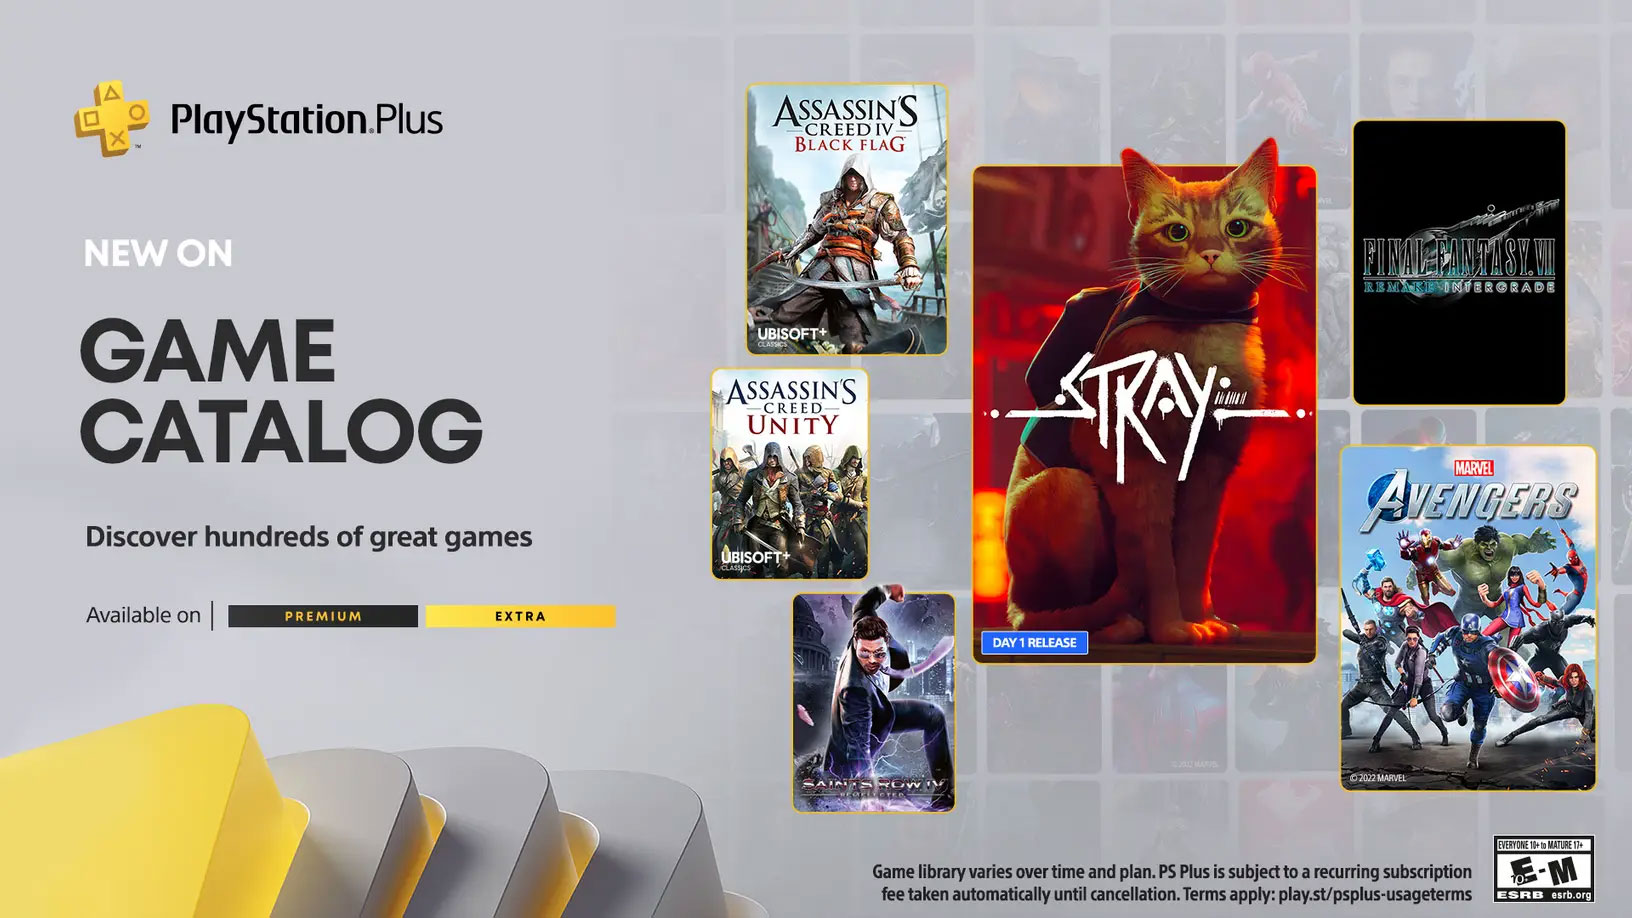 Join us for PlayStation Plus Festival of Play – PlayStation.Blog